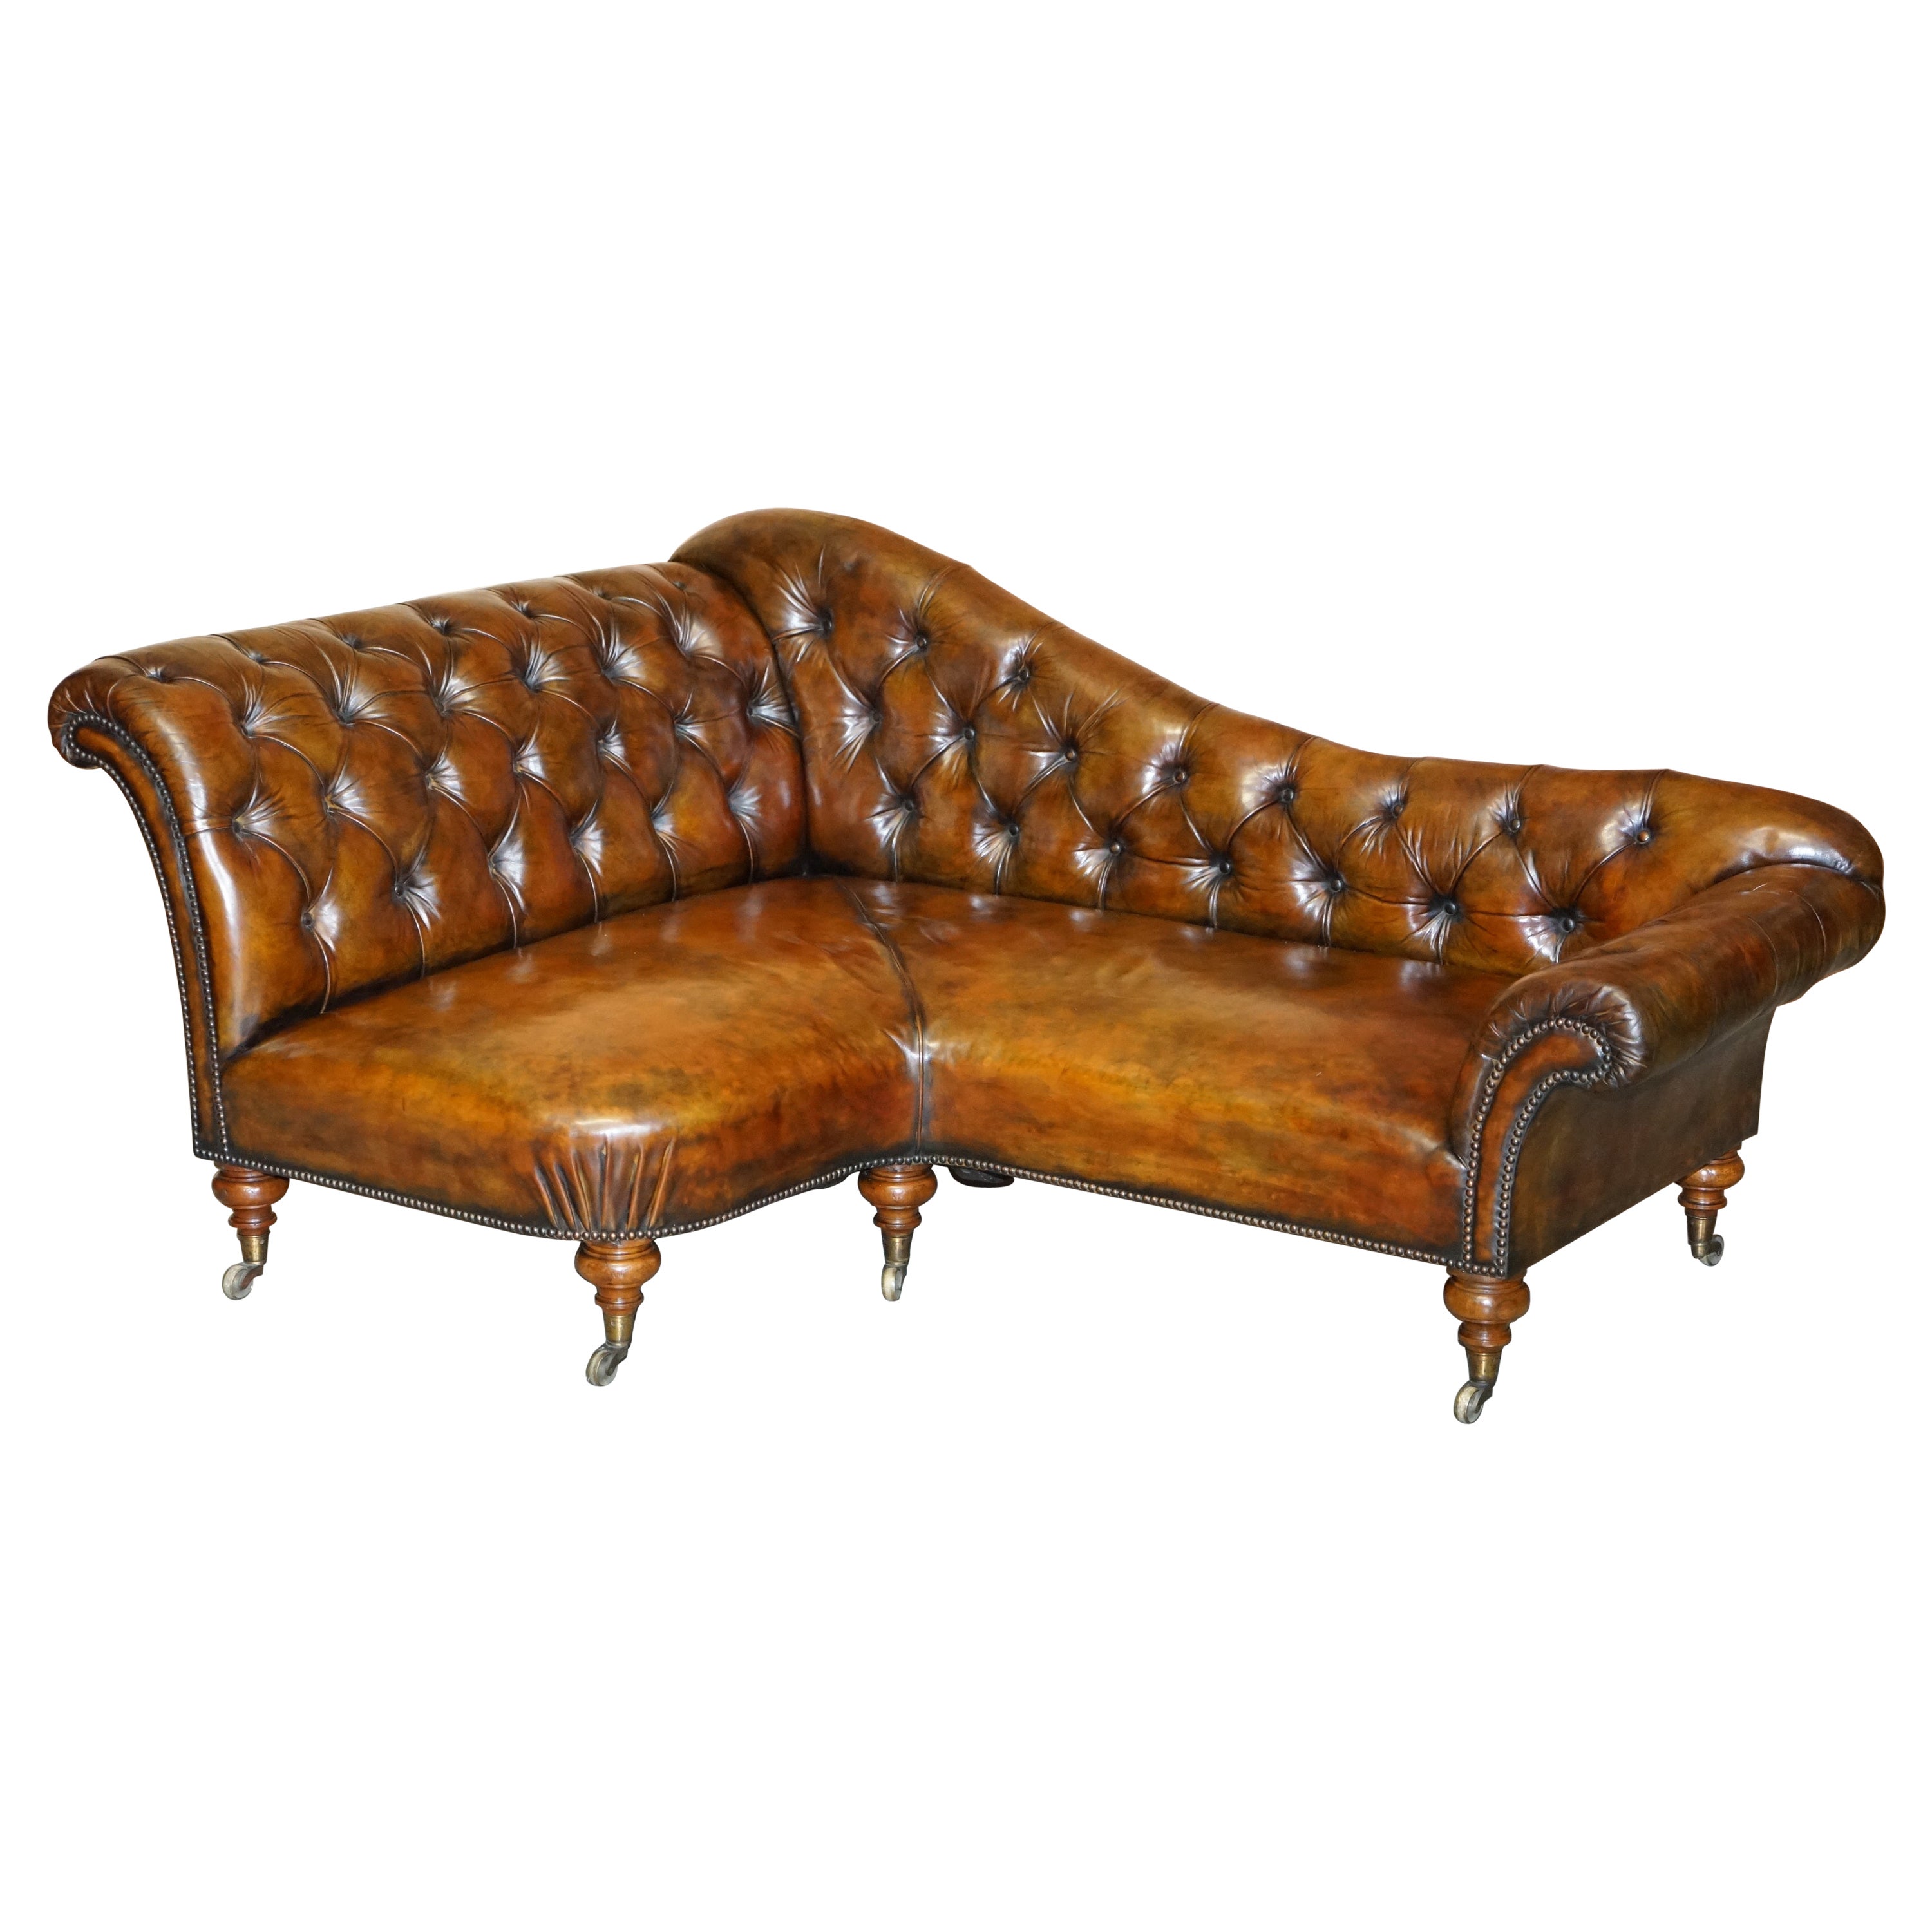 Restored Victorian Howard & Son's Chesterfield Brown Leather Corner Sofa Chaise